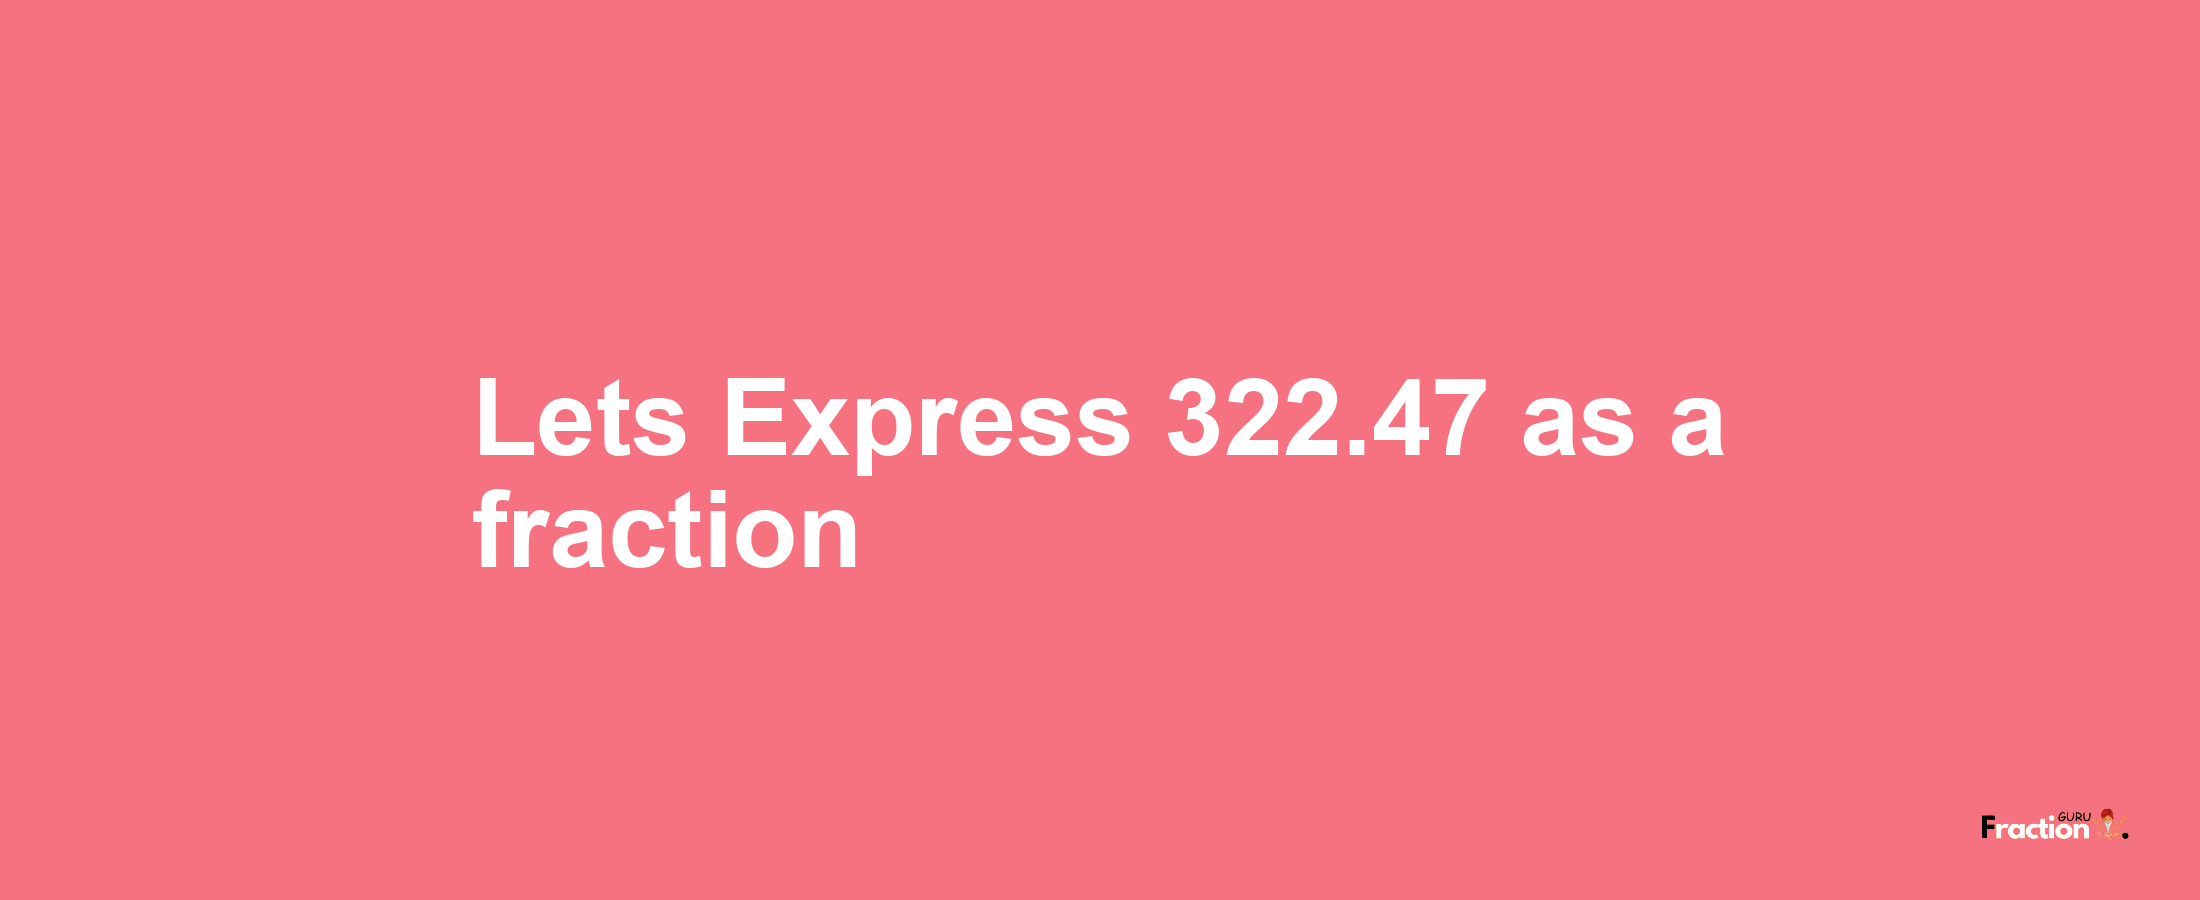 Lets Express 322.47 as afraction